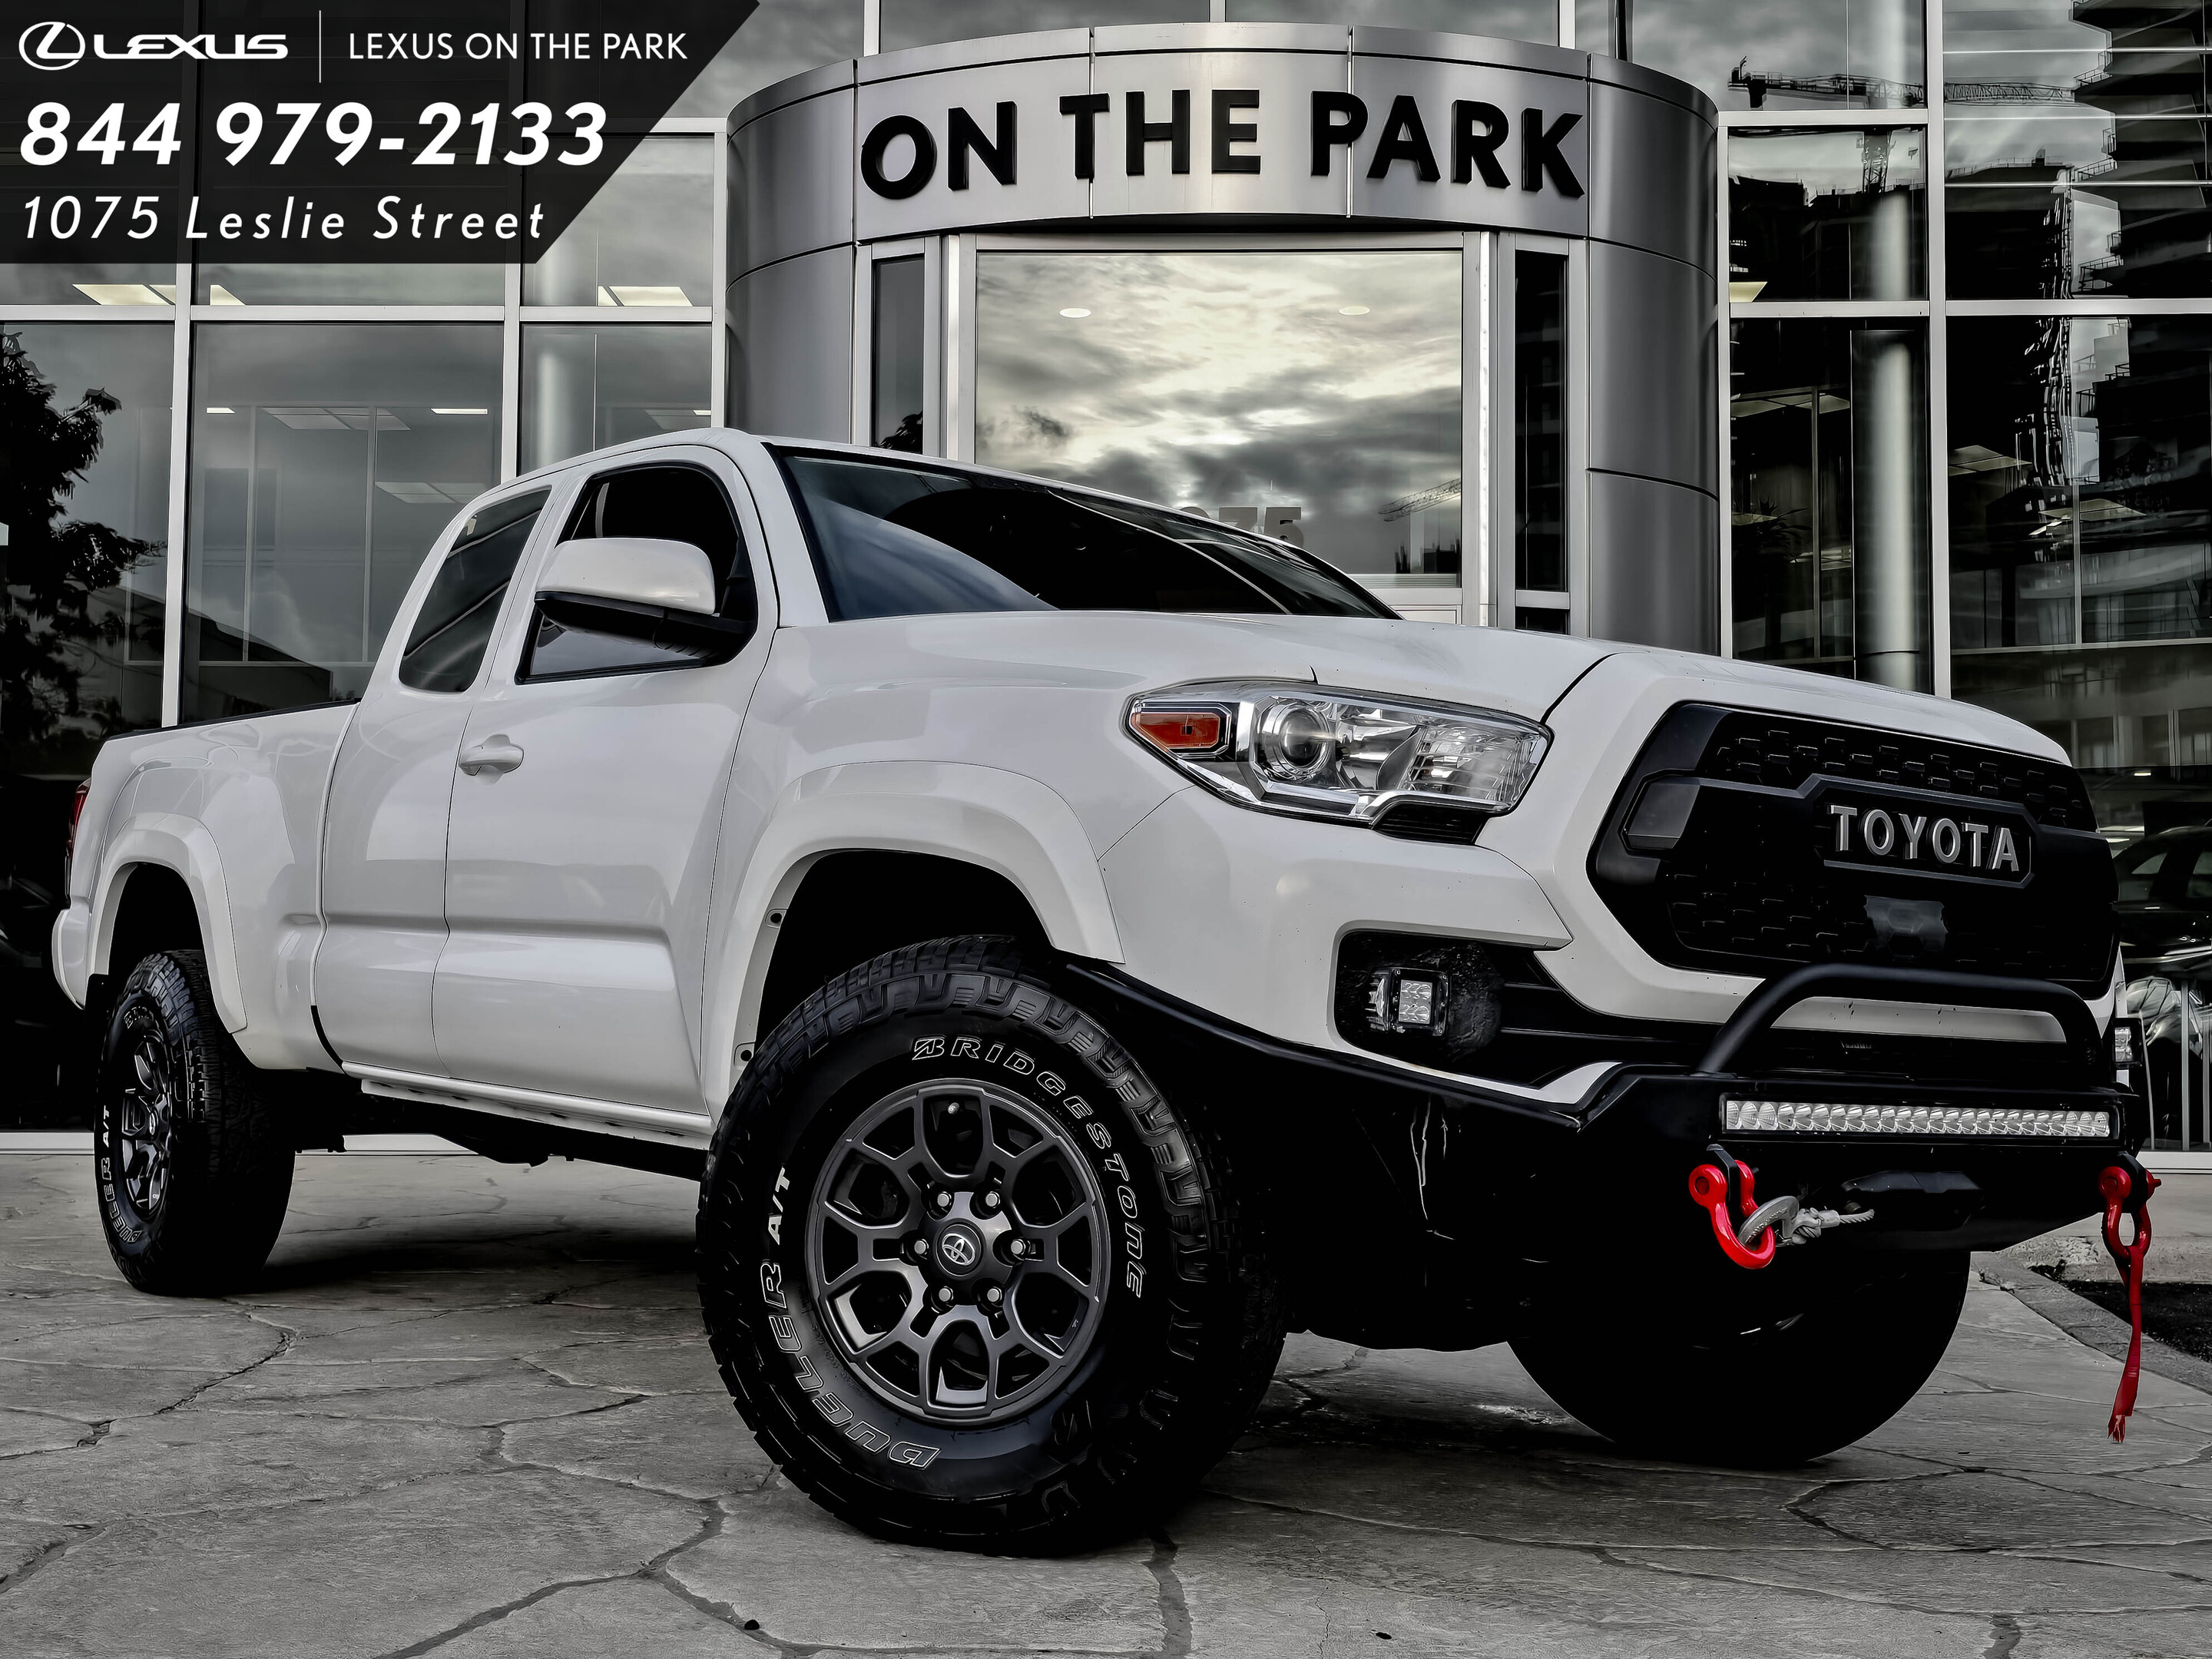 2018 Toyota Tacoma 4x2 Access Cab Auto SR Pkg|Safety Certified|